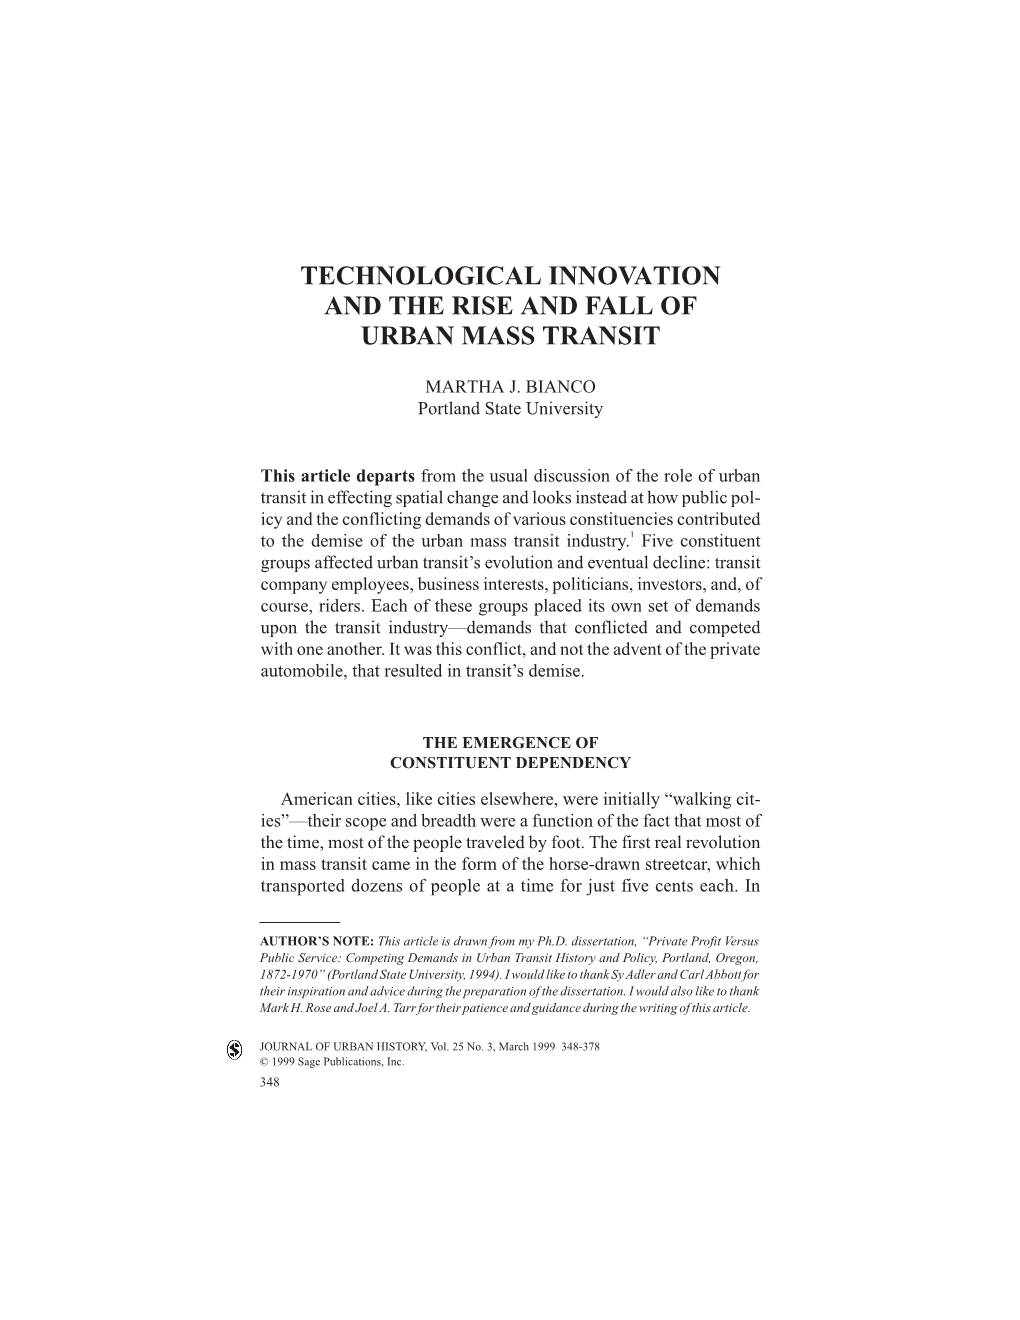 Technological Innovation and the Rise and Fall of Urban Mass Transit